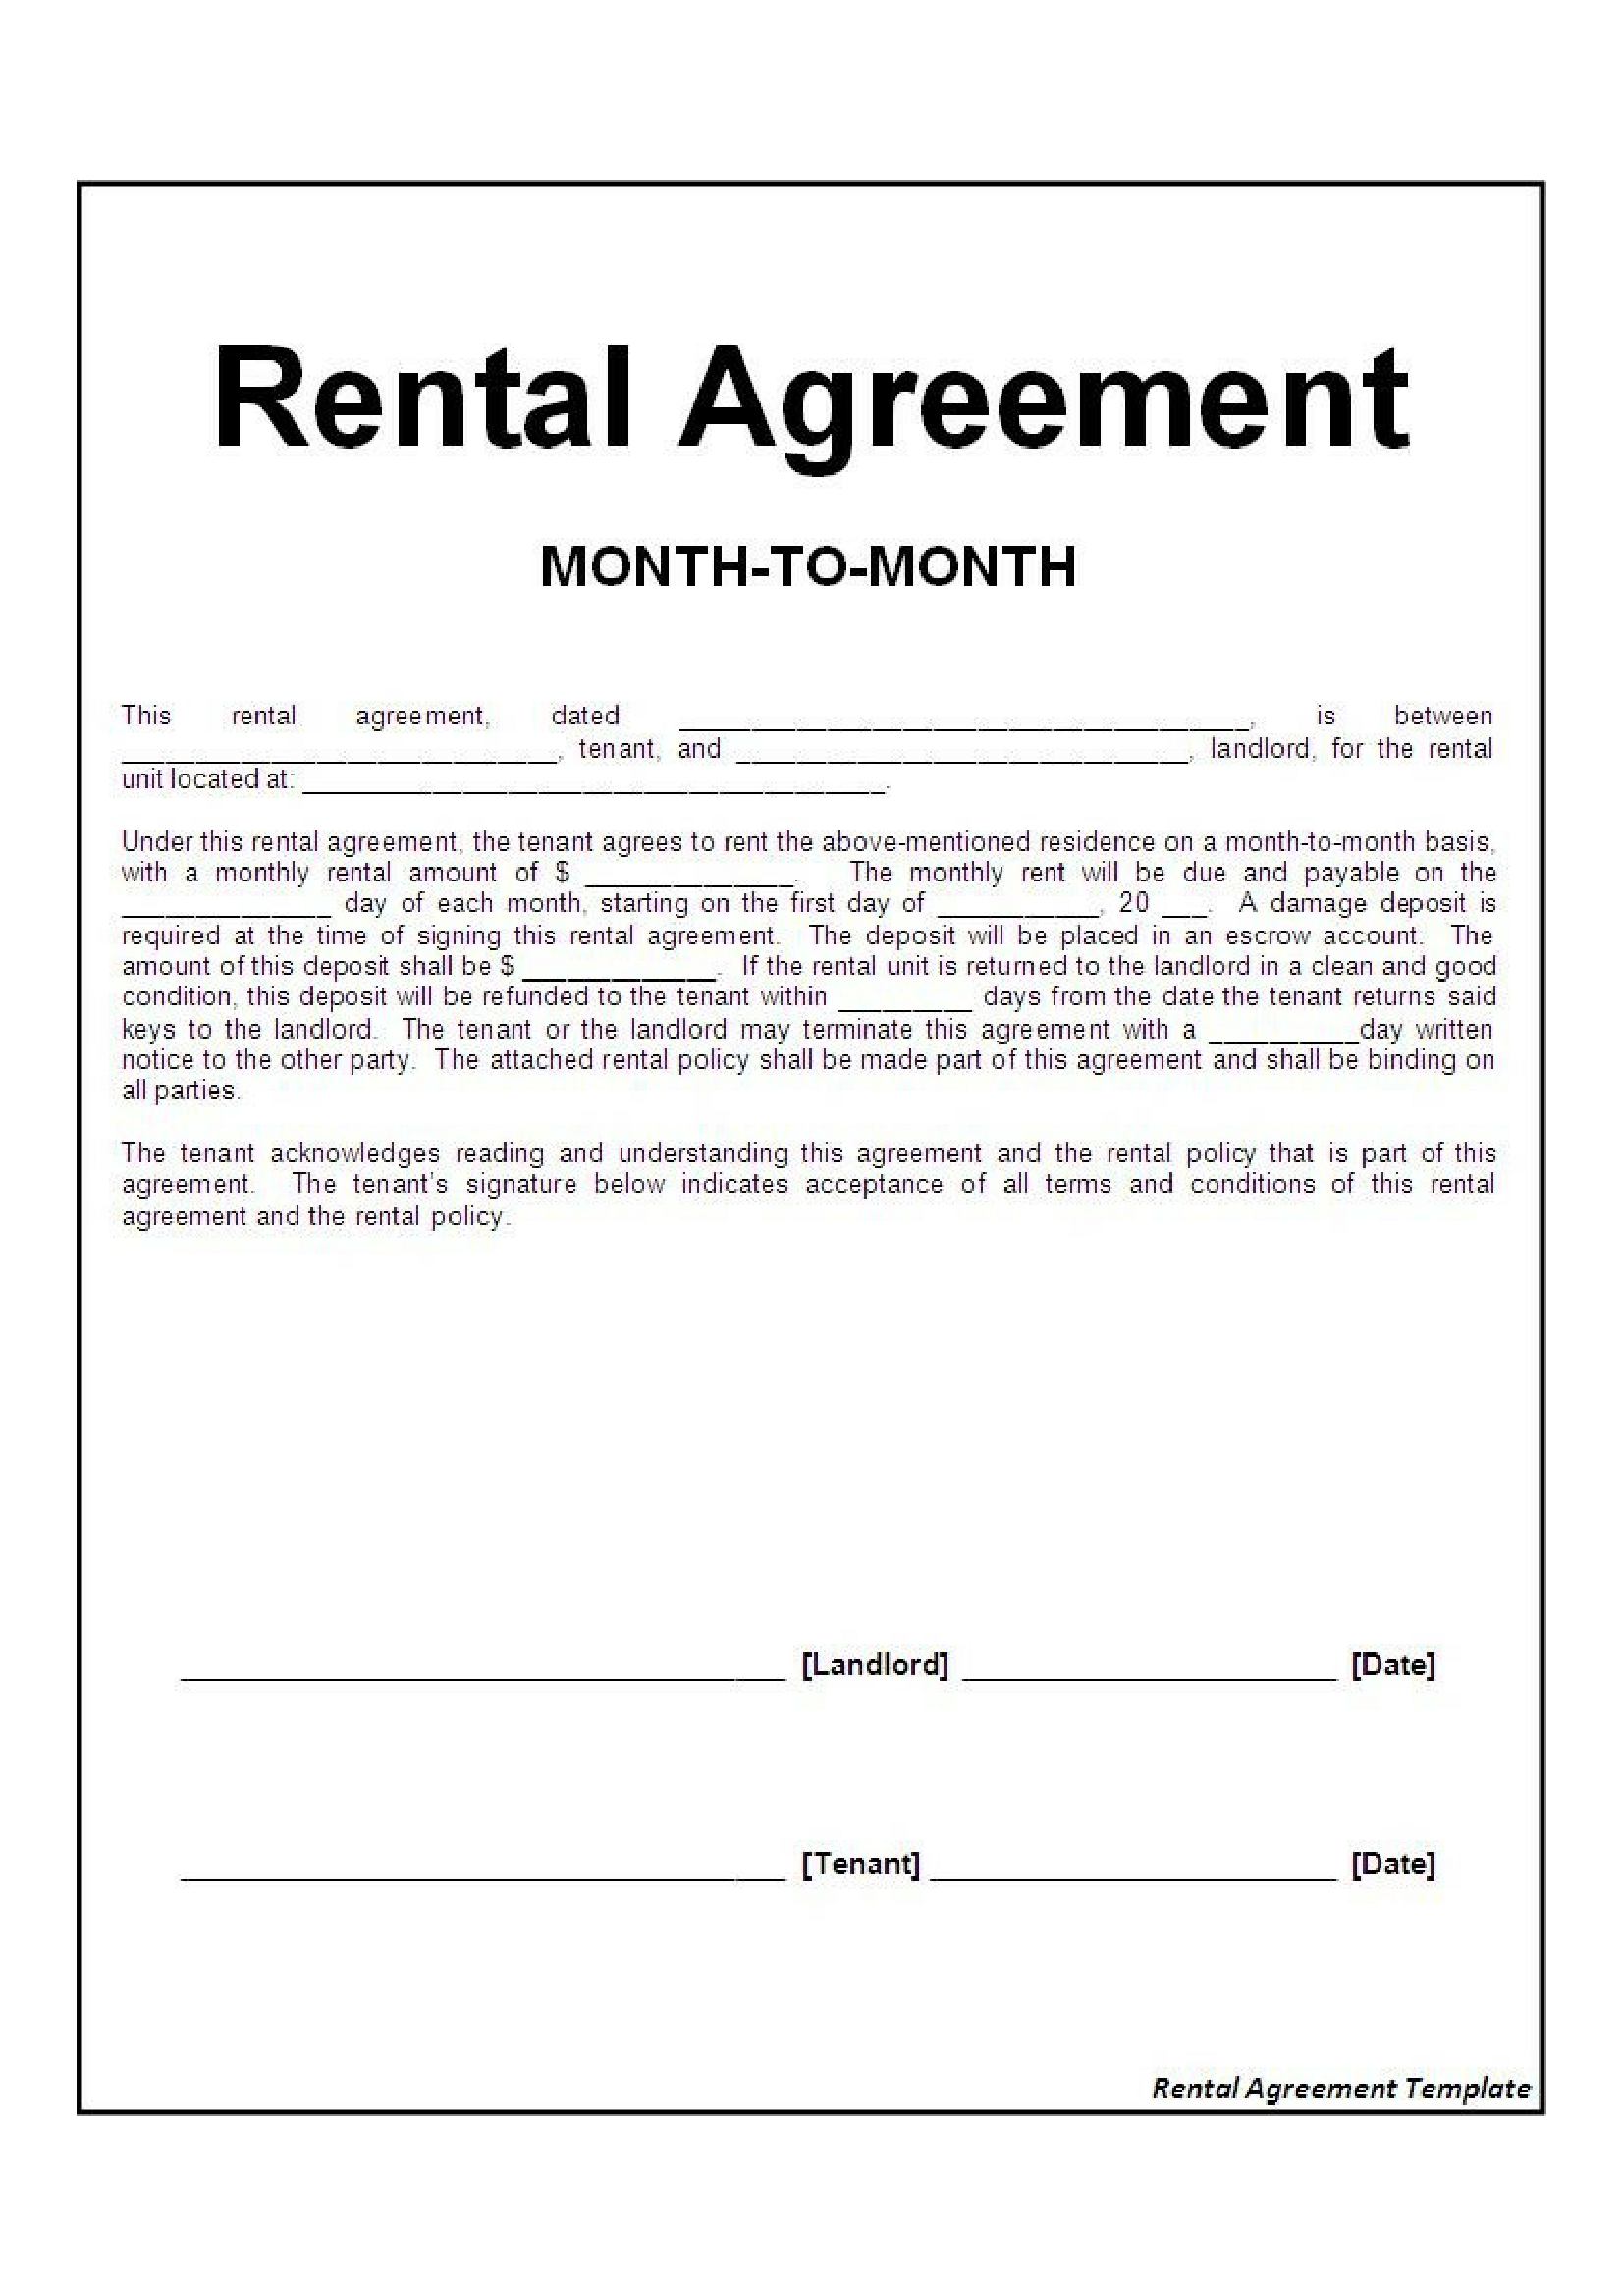 monthly rental agreement template month to month rental agreement 